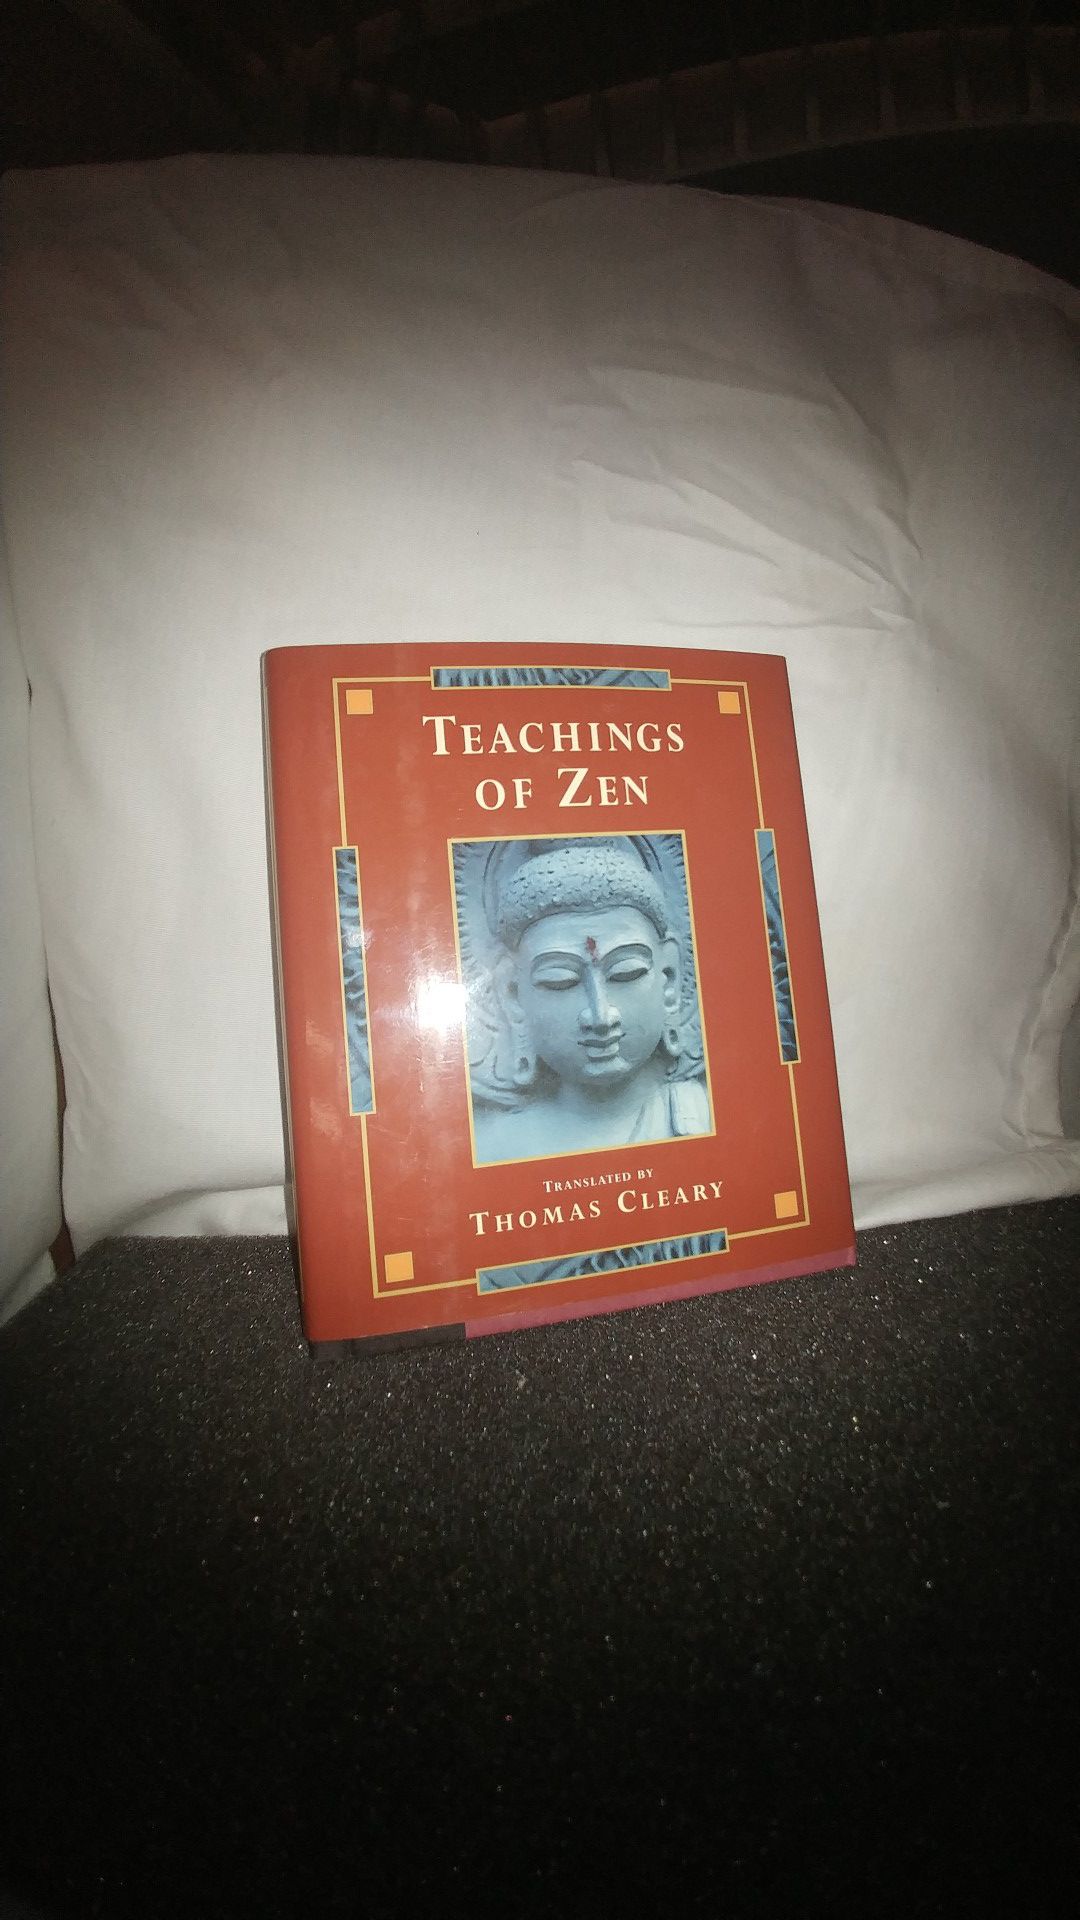 Teachings of Zen Translation by Thomas Cleary